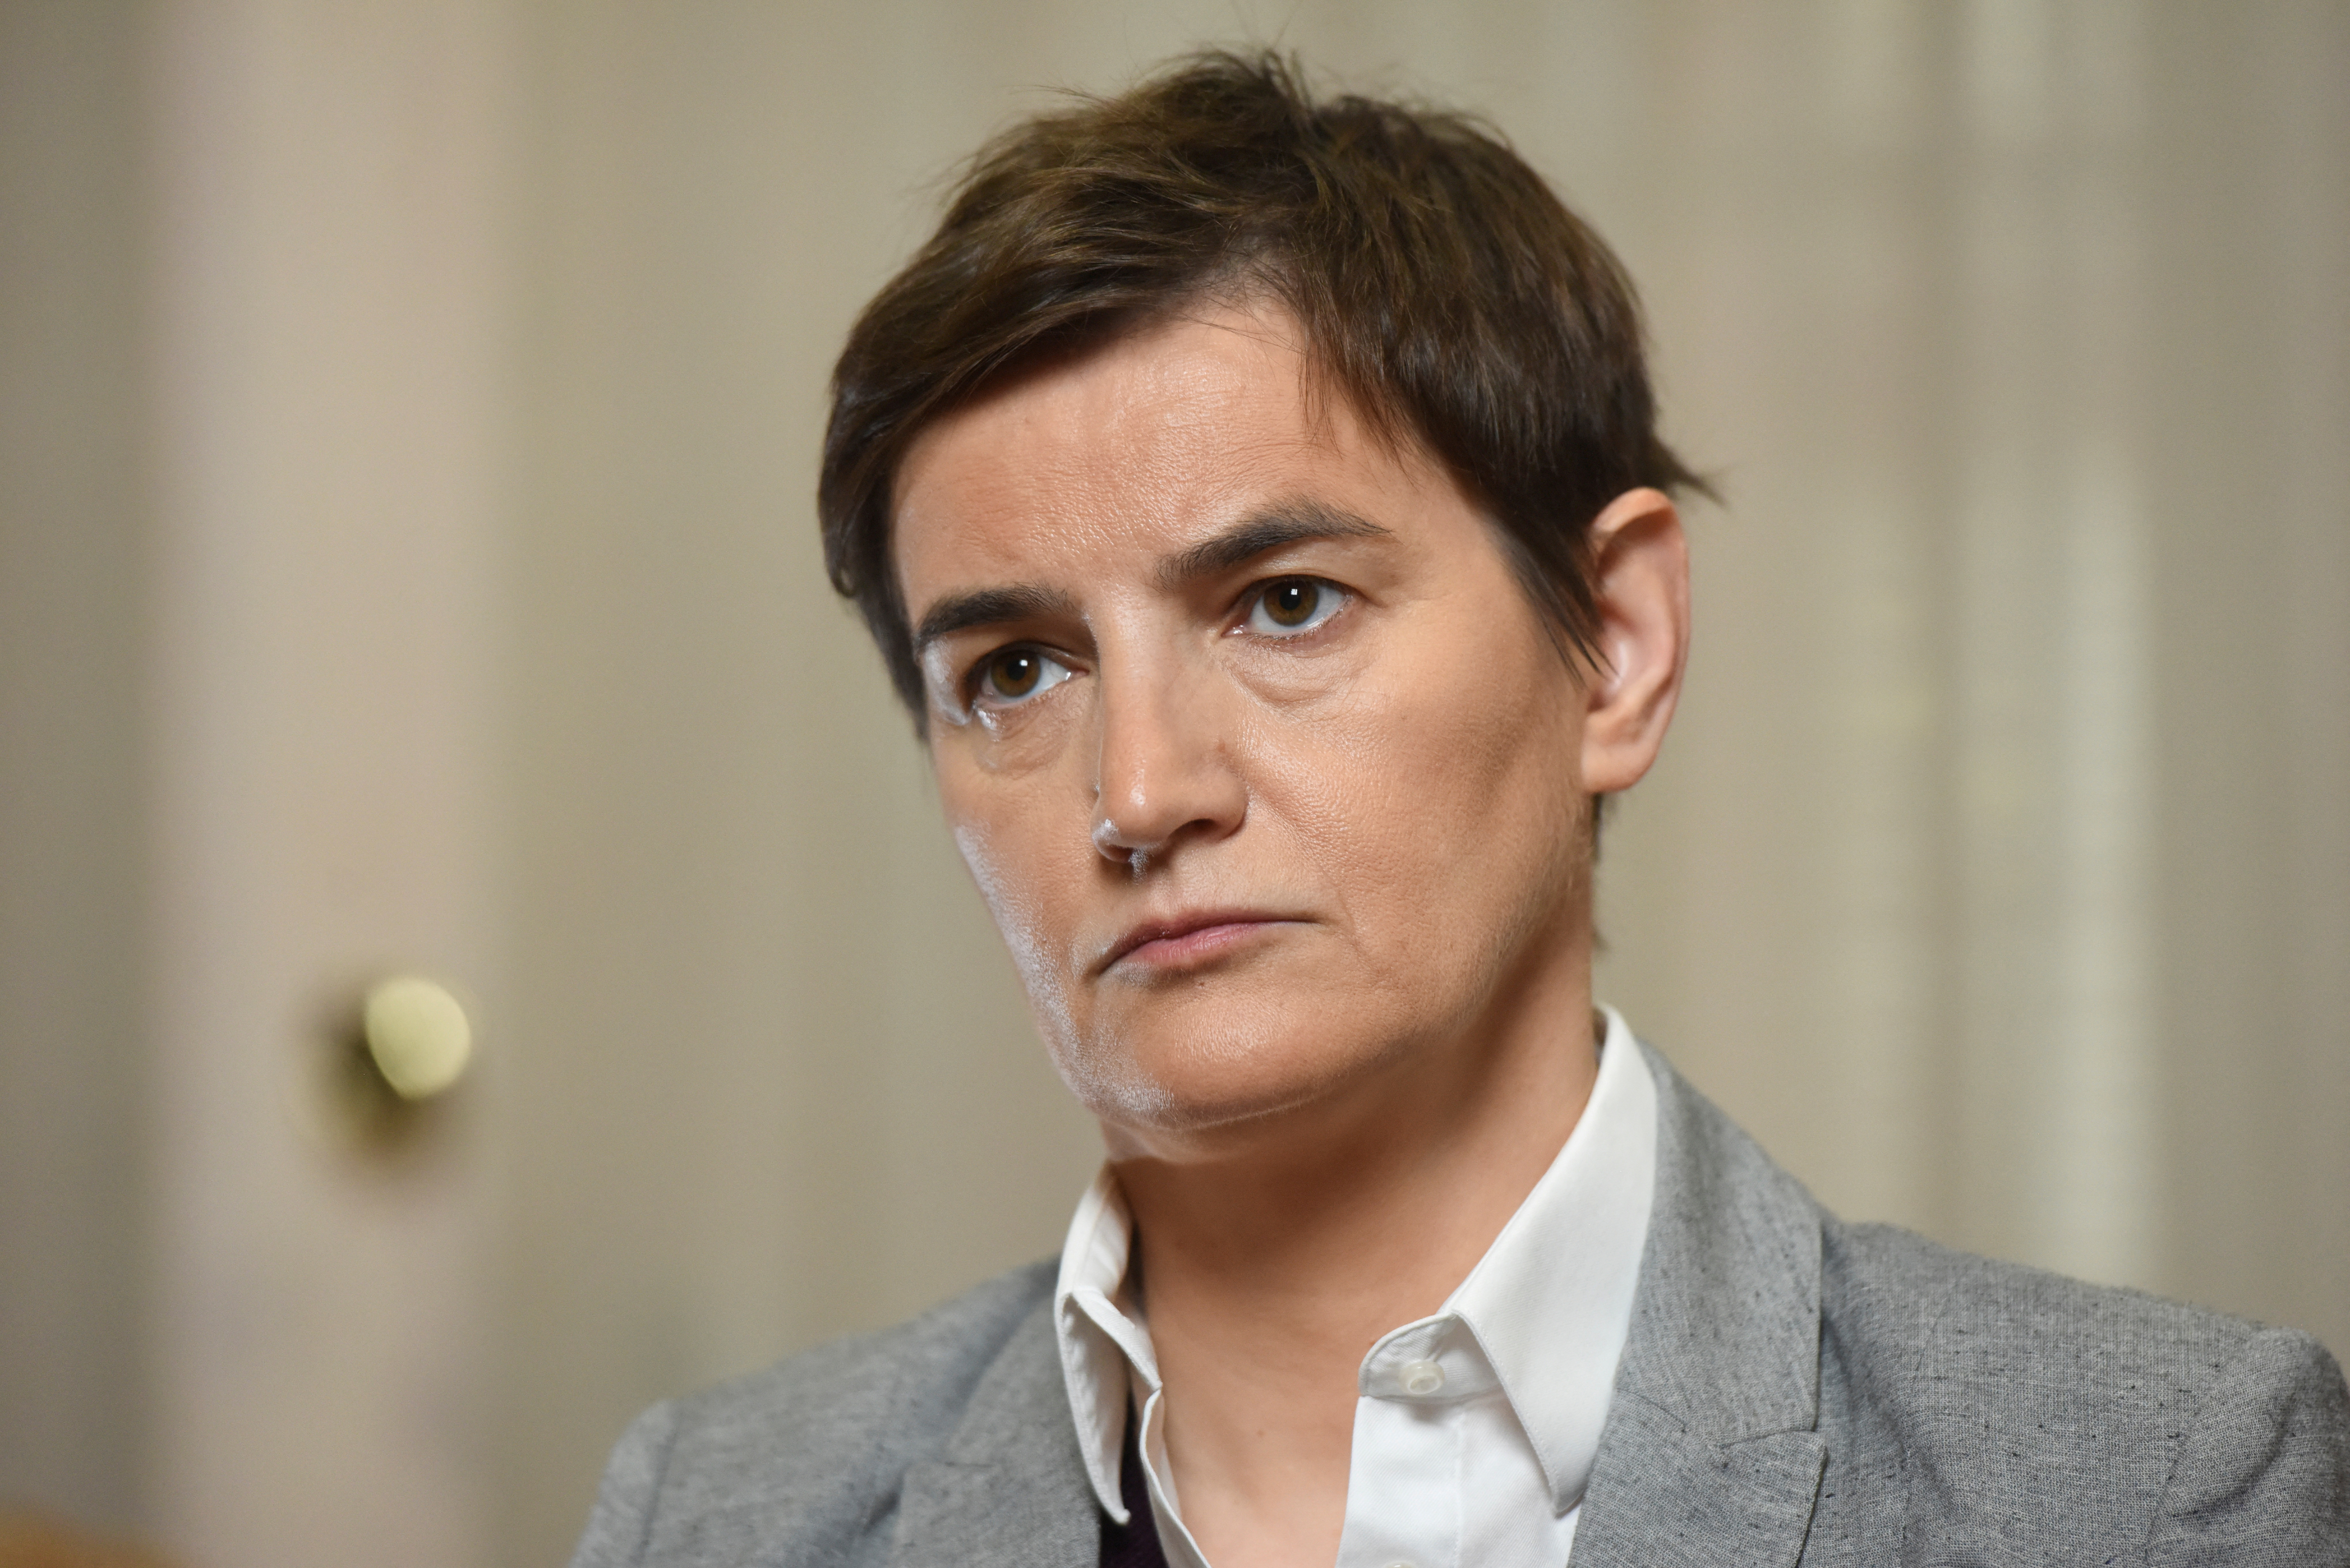 Serbian PM Ana Brnabic holds interview with Reuters, in Belgrade